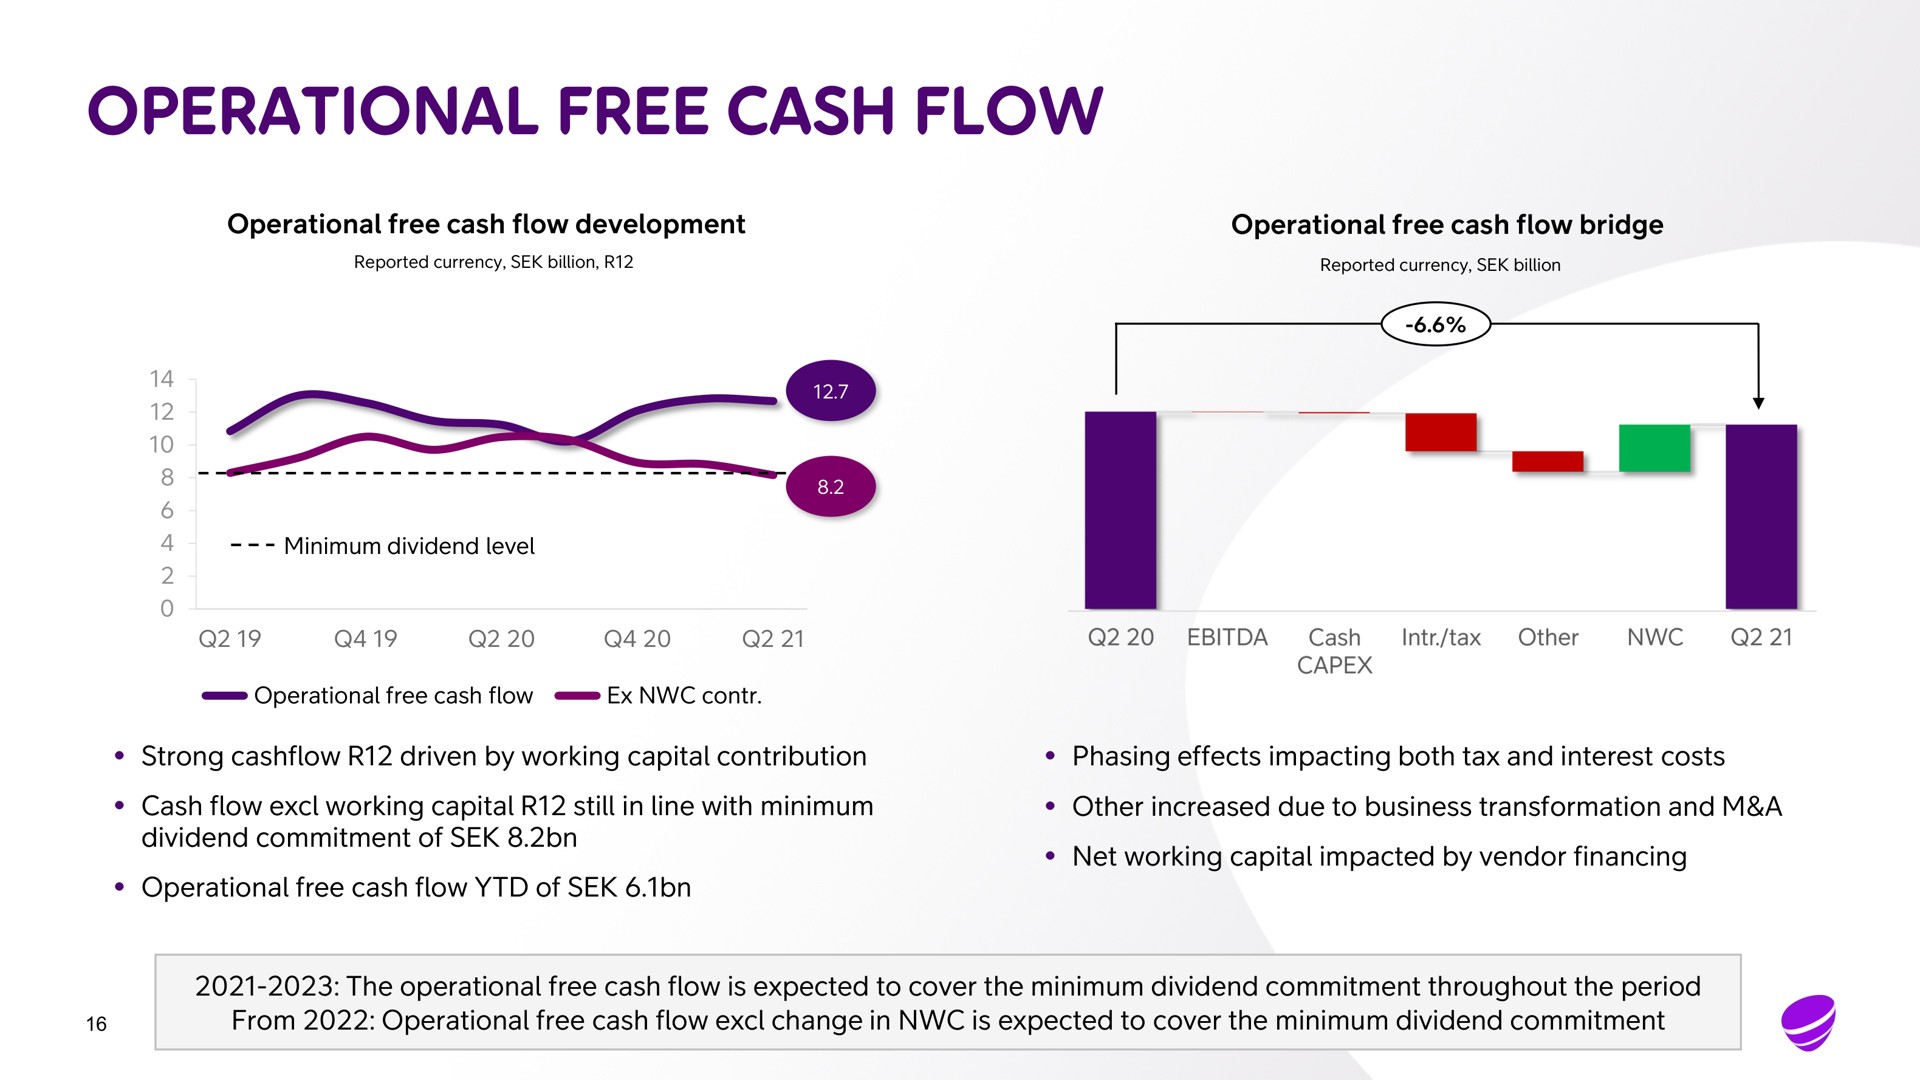 operational free cash flow operational free cash flow development operational free cash flow bridge strong driven by working capital contribution phasing effects impacting both tax and interest costs cash flow working capital still in line with minimum other increased due to business transformation and a dividend commitment of operational free cash flow of net working capital impacted by vendor financing the operational free cash flow is expected to cover the minimum dividend commitment throughout the period from operational free cash flow change in is expected to cover the minimum dividend commitment i | Telia Company